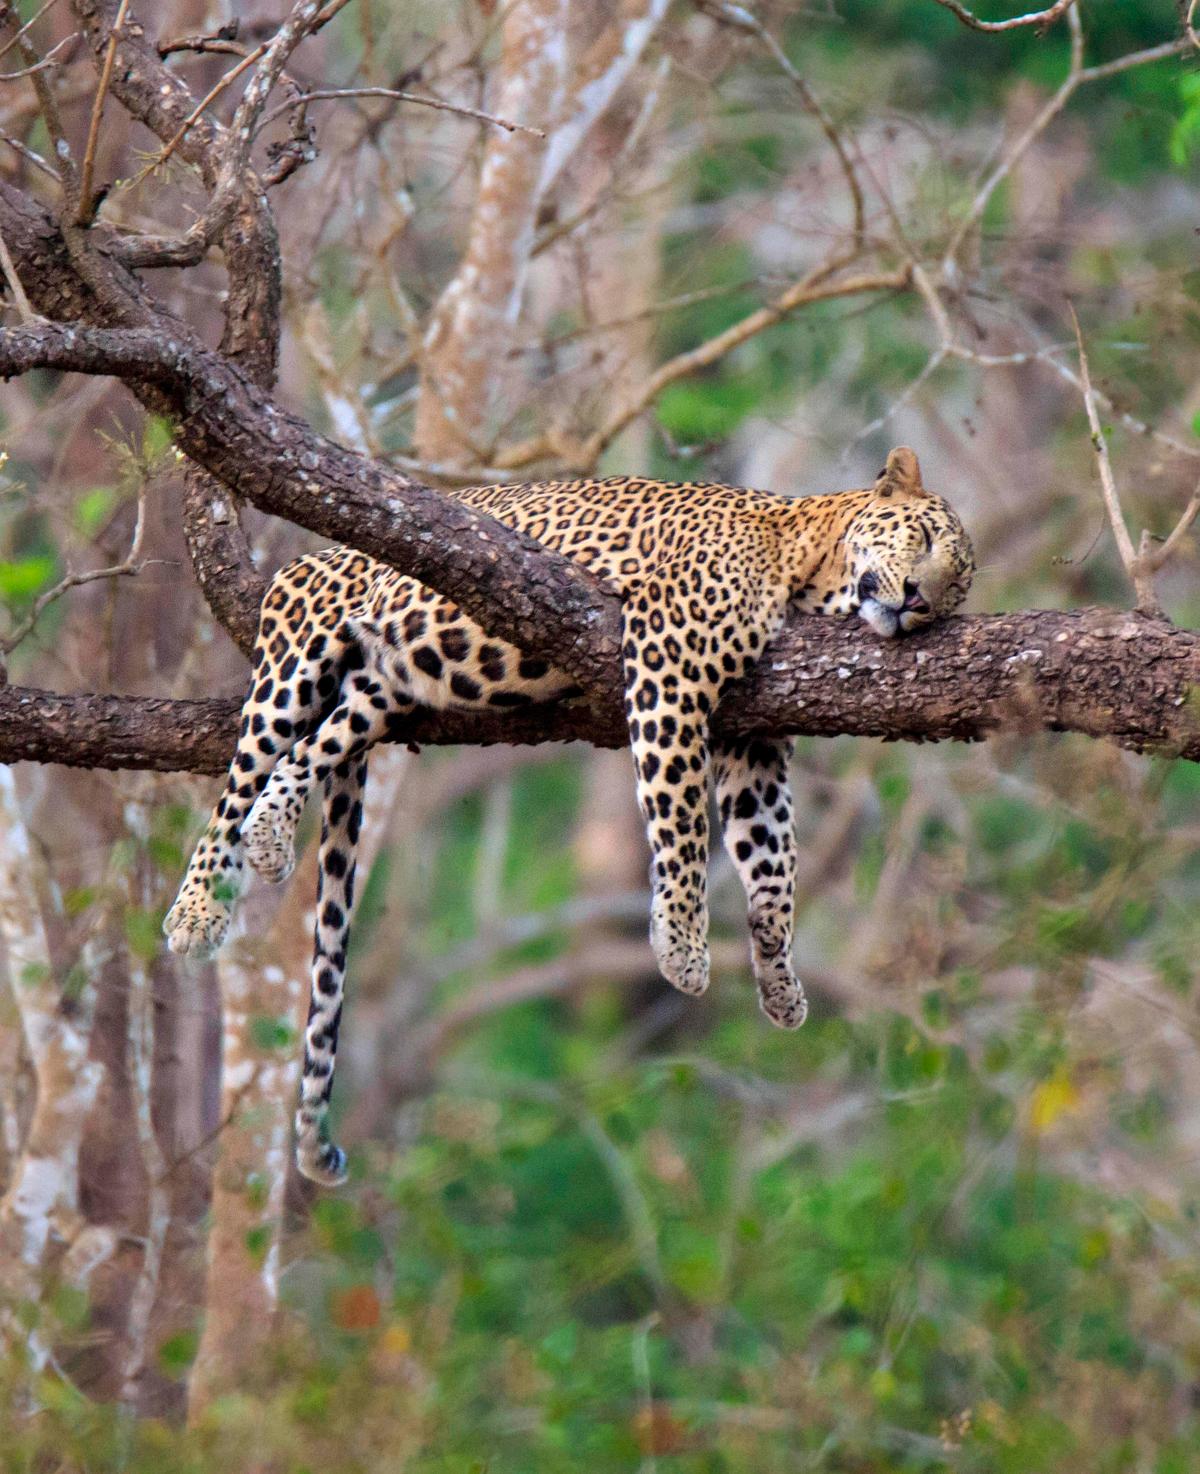 This tired leopard picked the perfect spot for a nap. (Caters News)